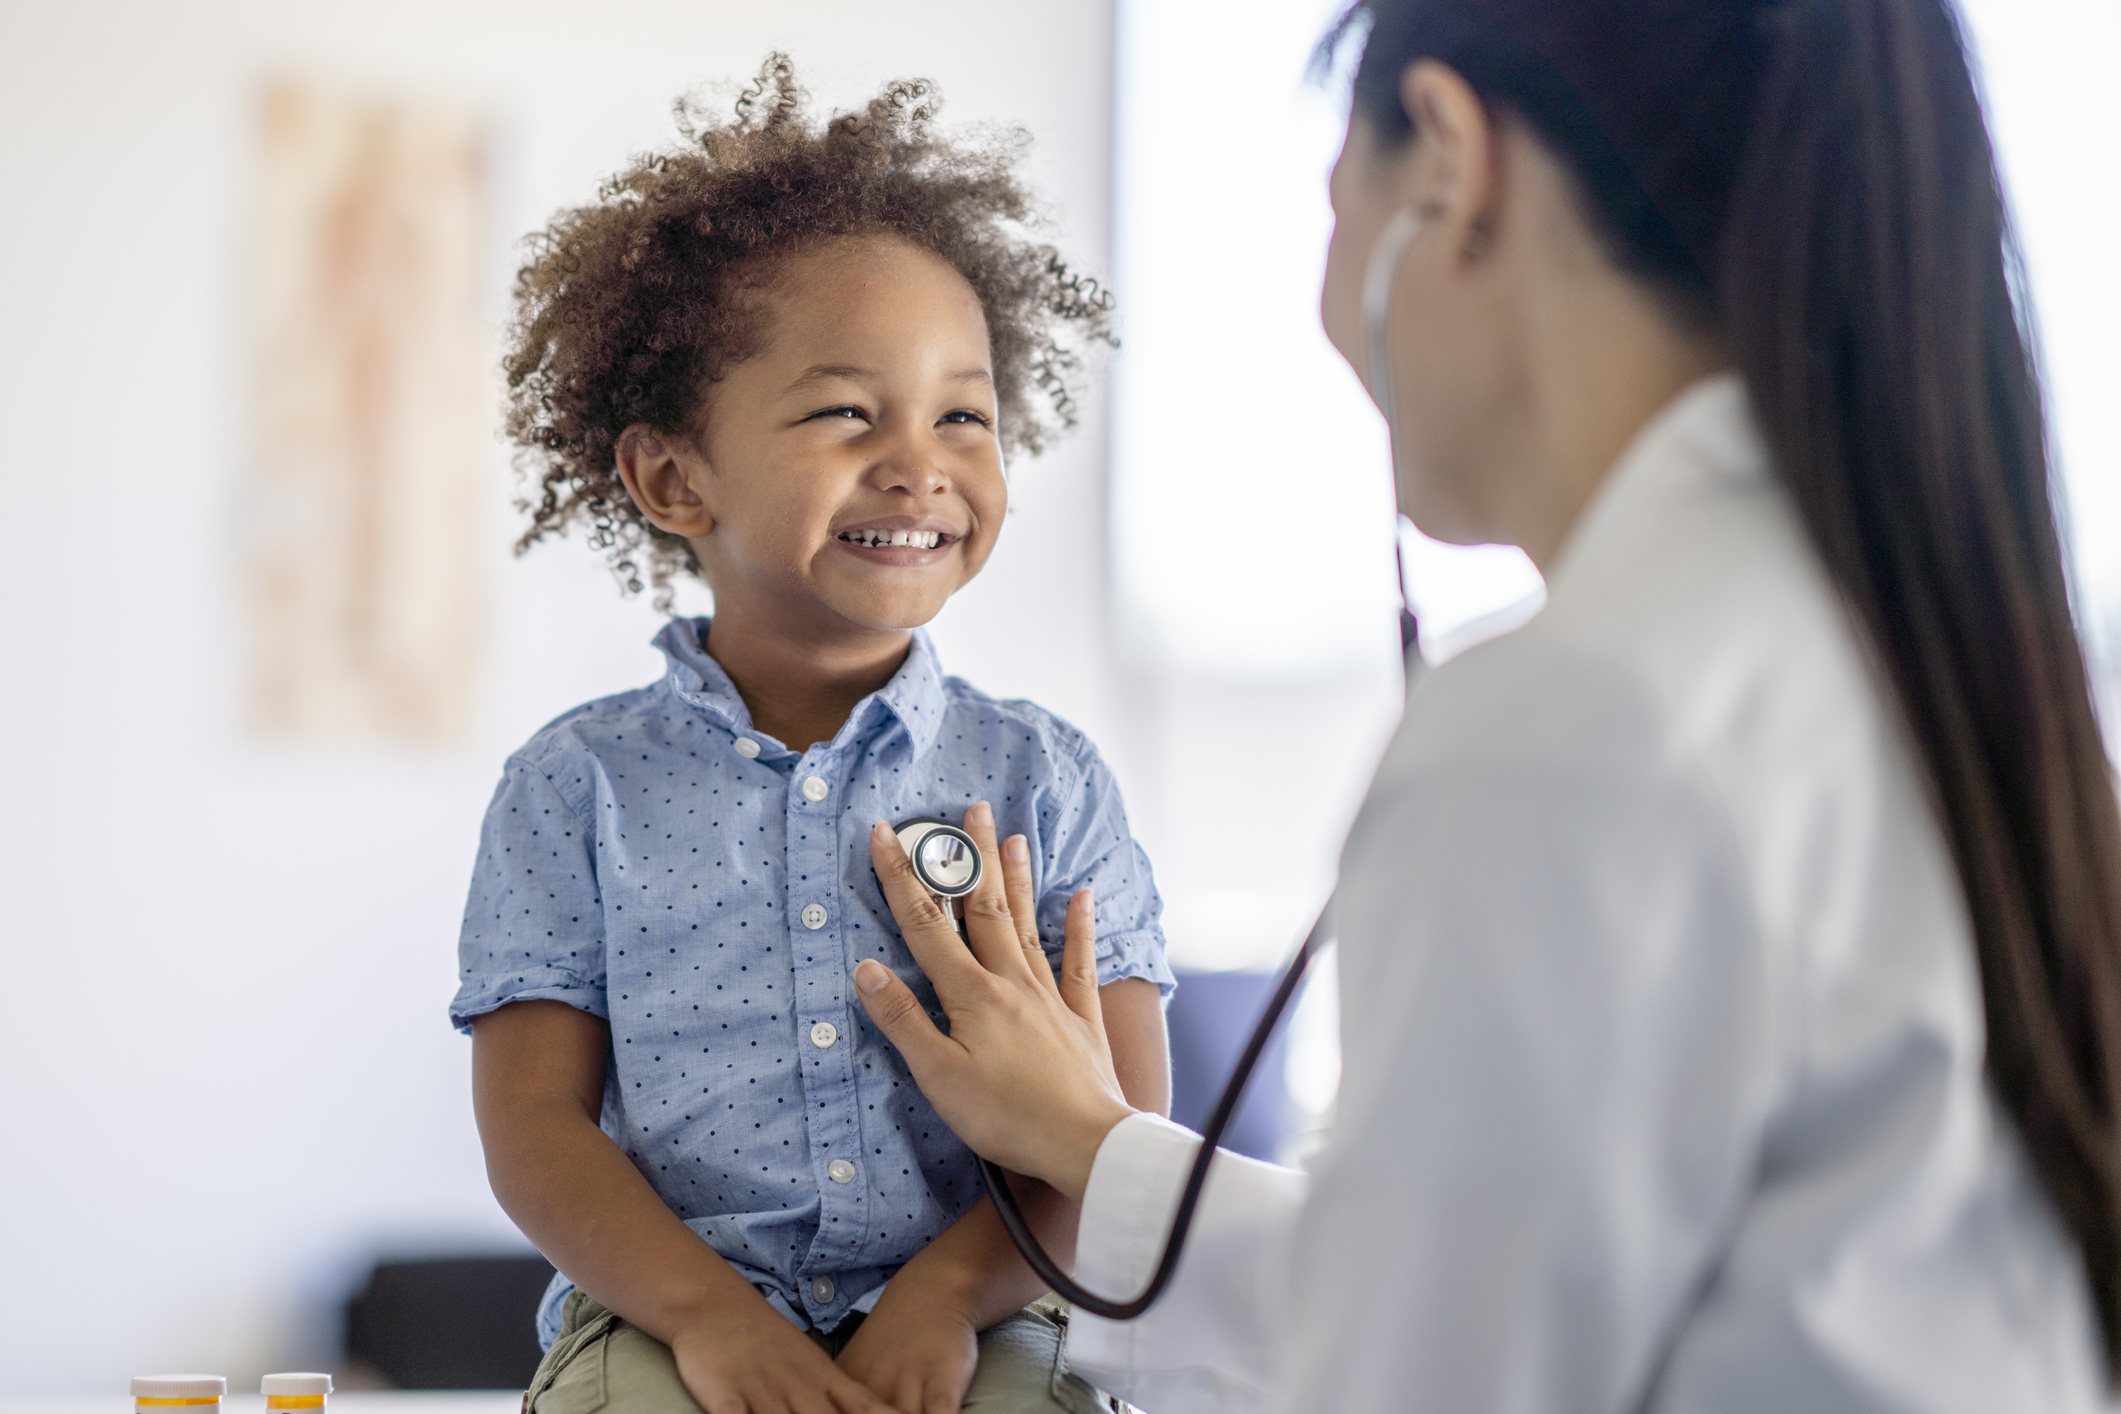 A young ethnic child smiles while having heart beat checked by a health care provider